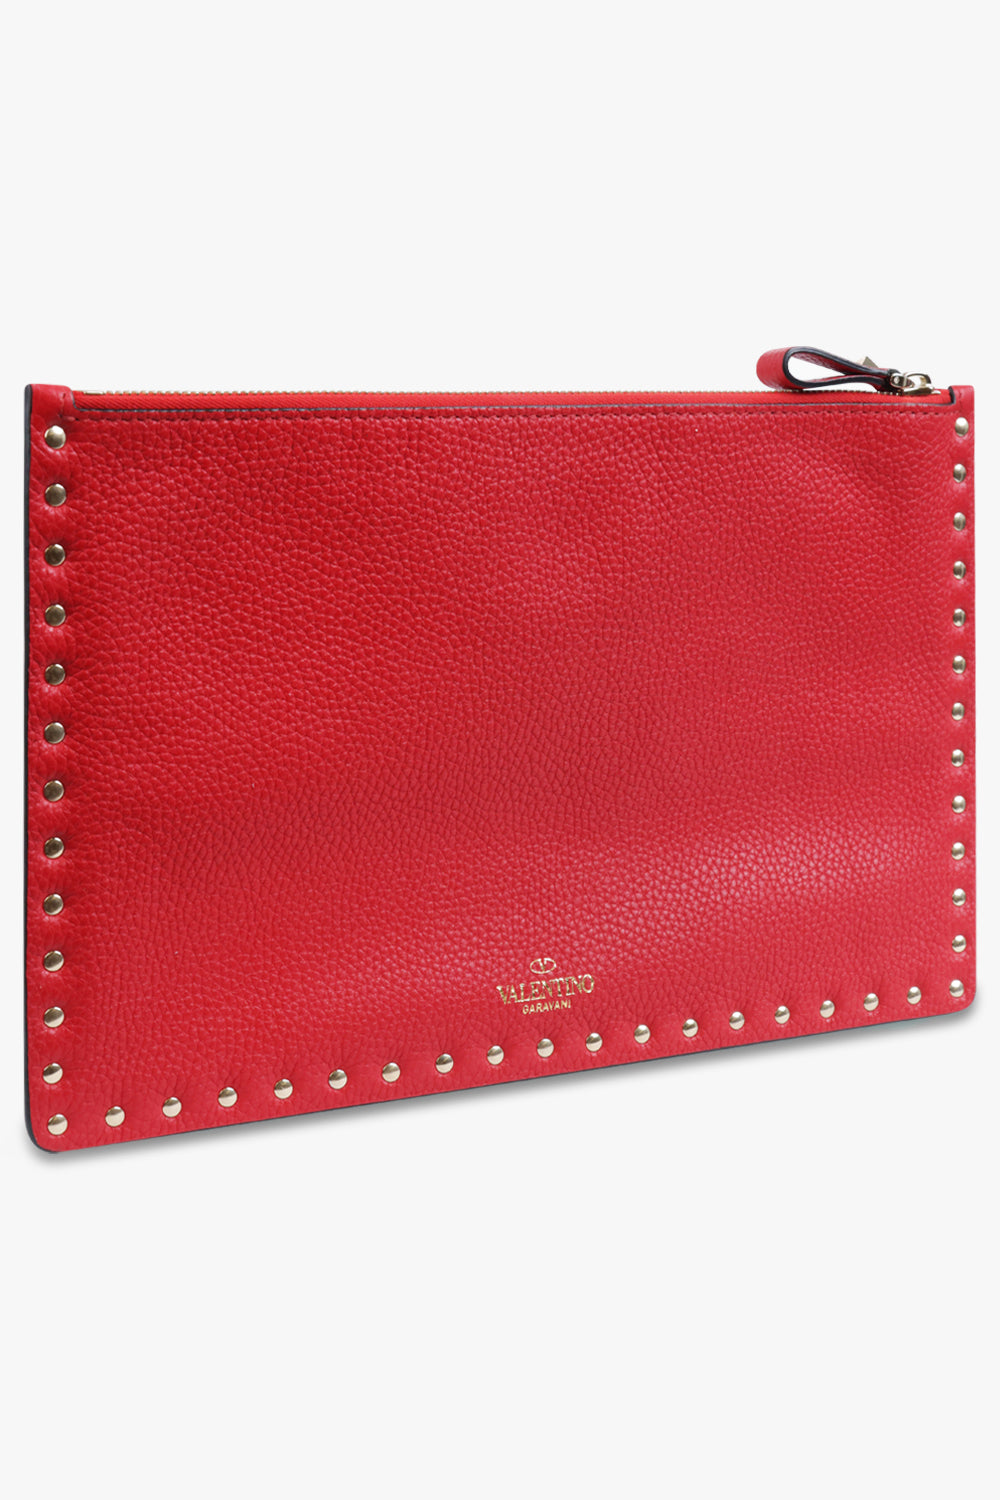 VALENTINO BAGS RED ROCKSTUD LARGE ZIP POUCH GRAINED | ROUGE